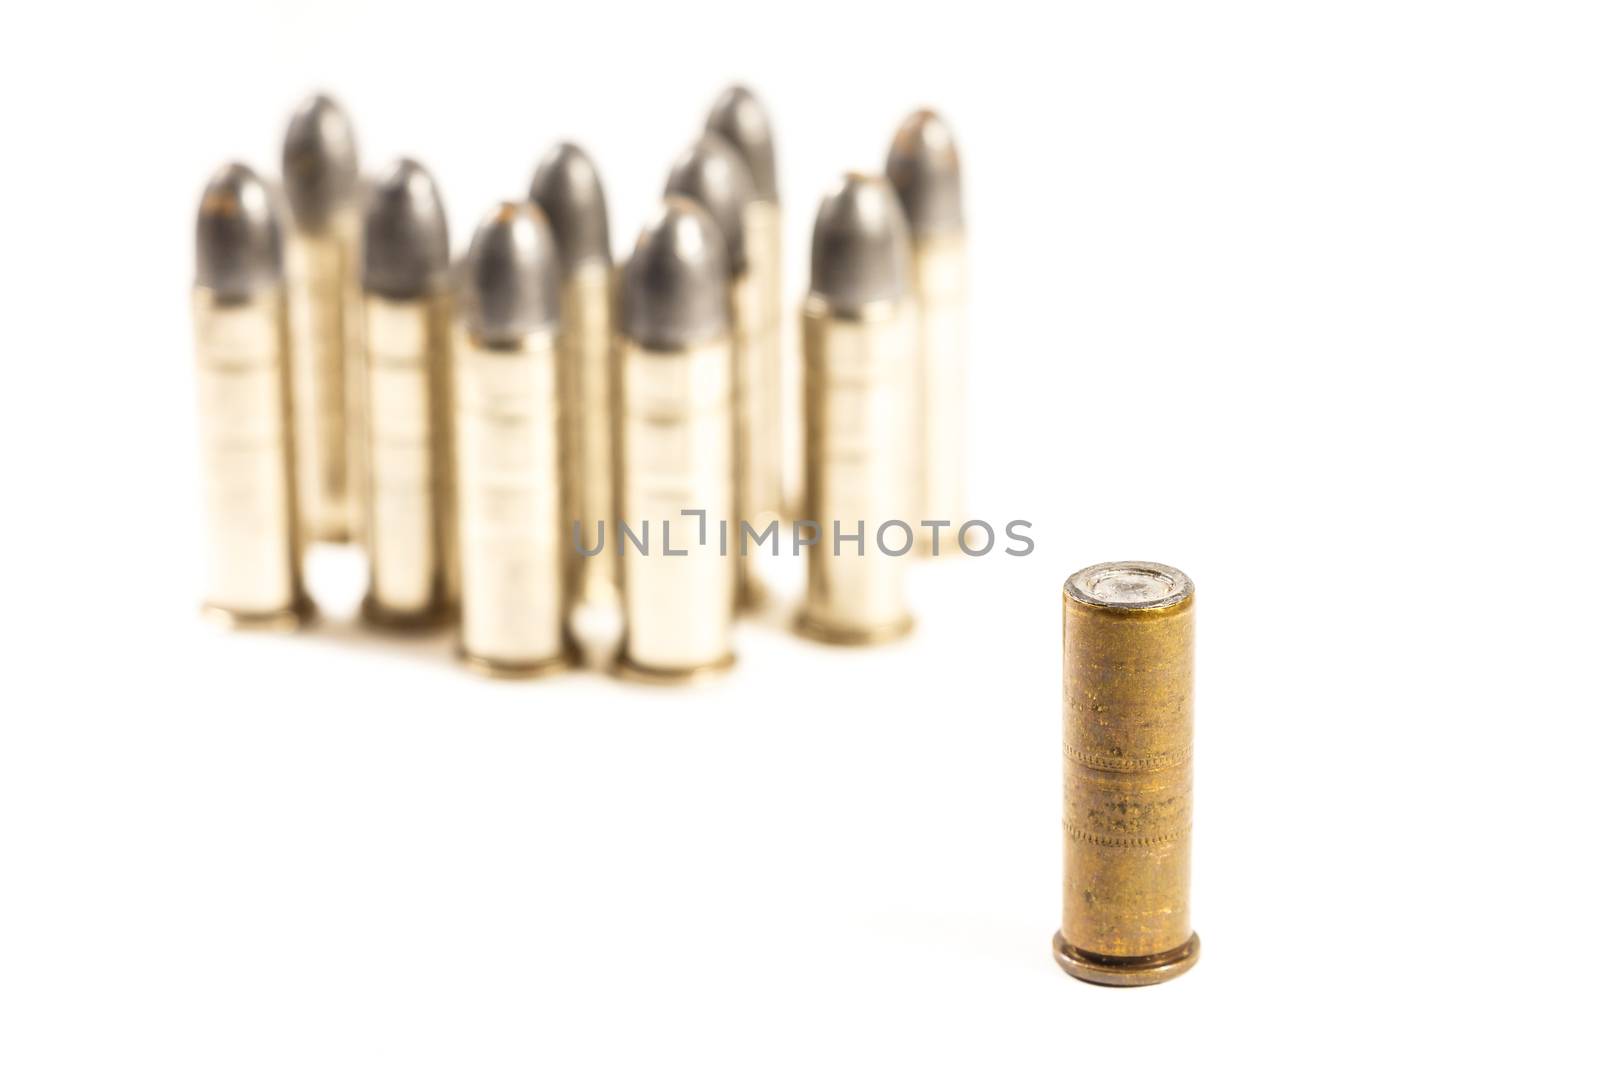 Think different (group of bullets and single bullet on white background)